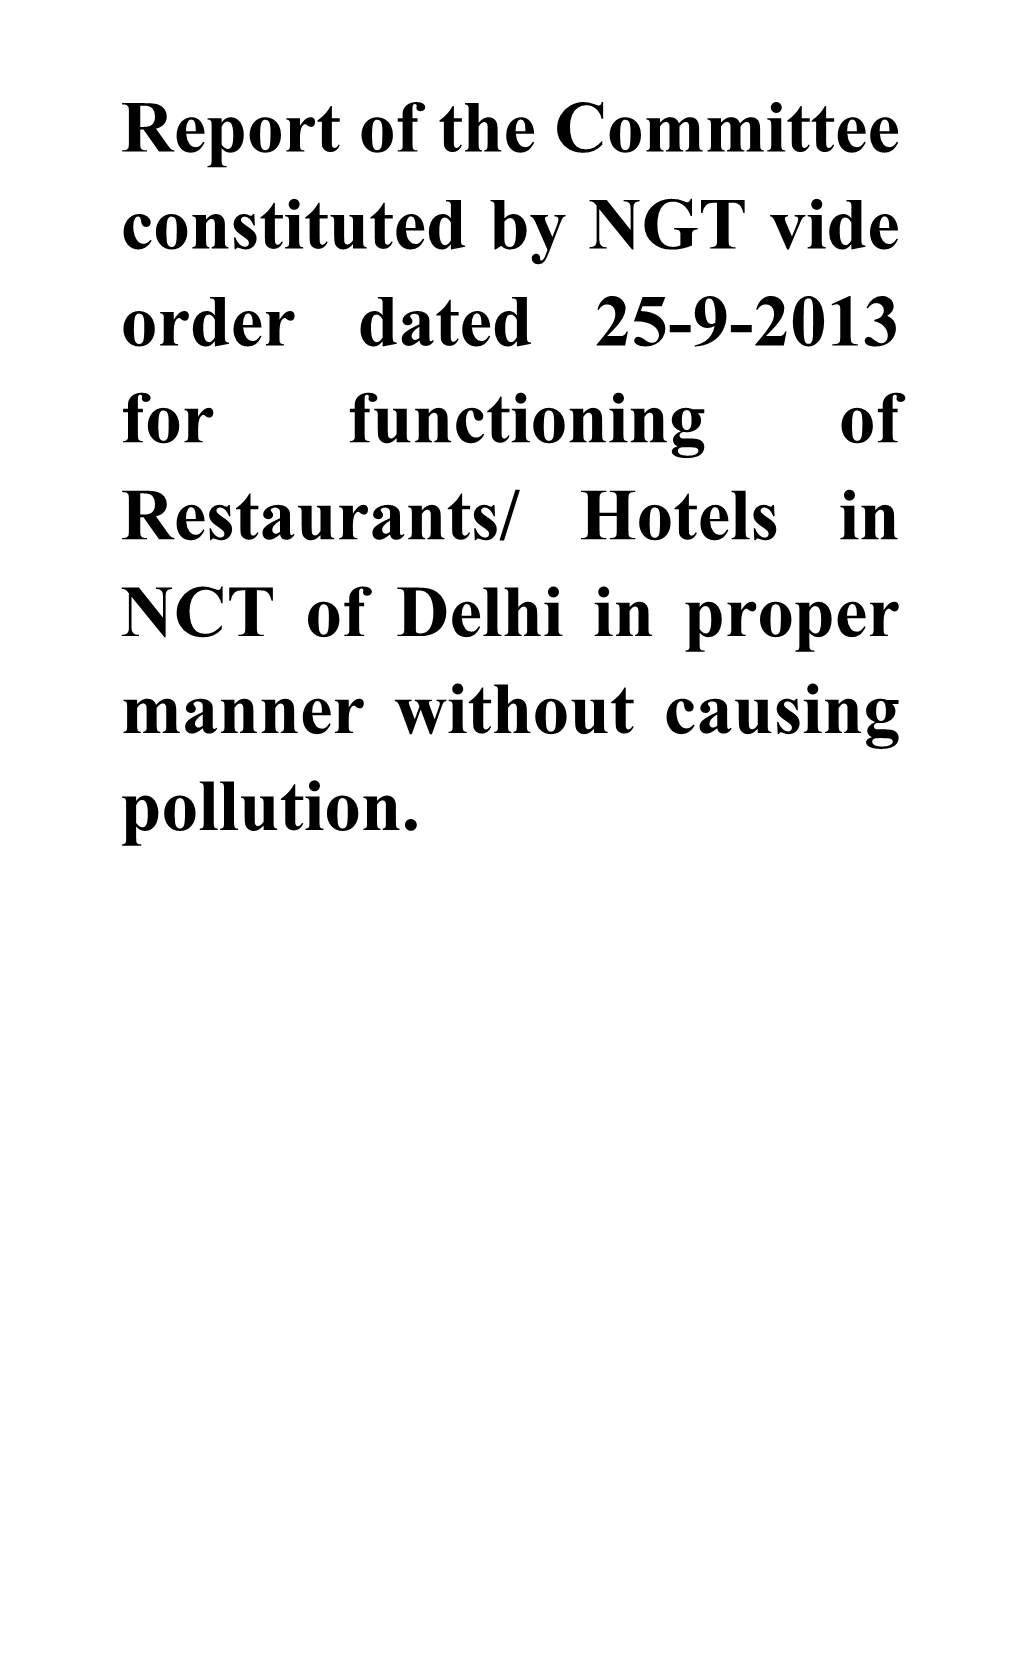 Report of the Committee Constituted by NGT Vide Order Dated 25-9-2013 for Functioning